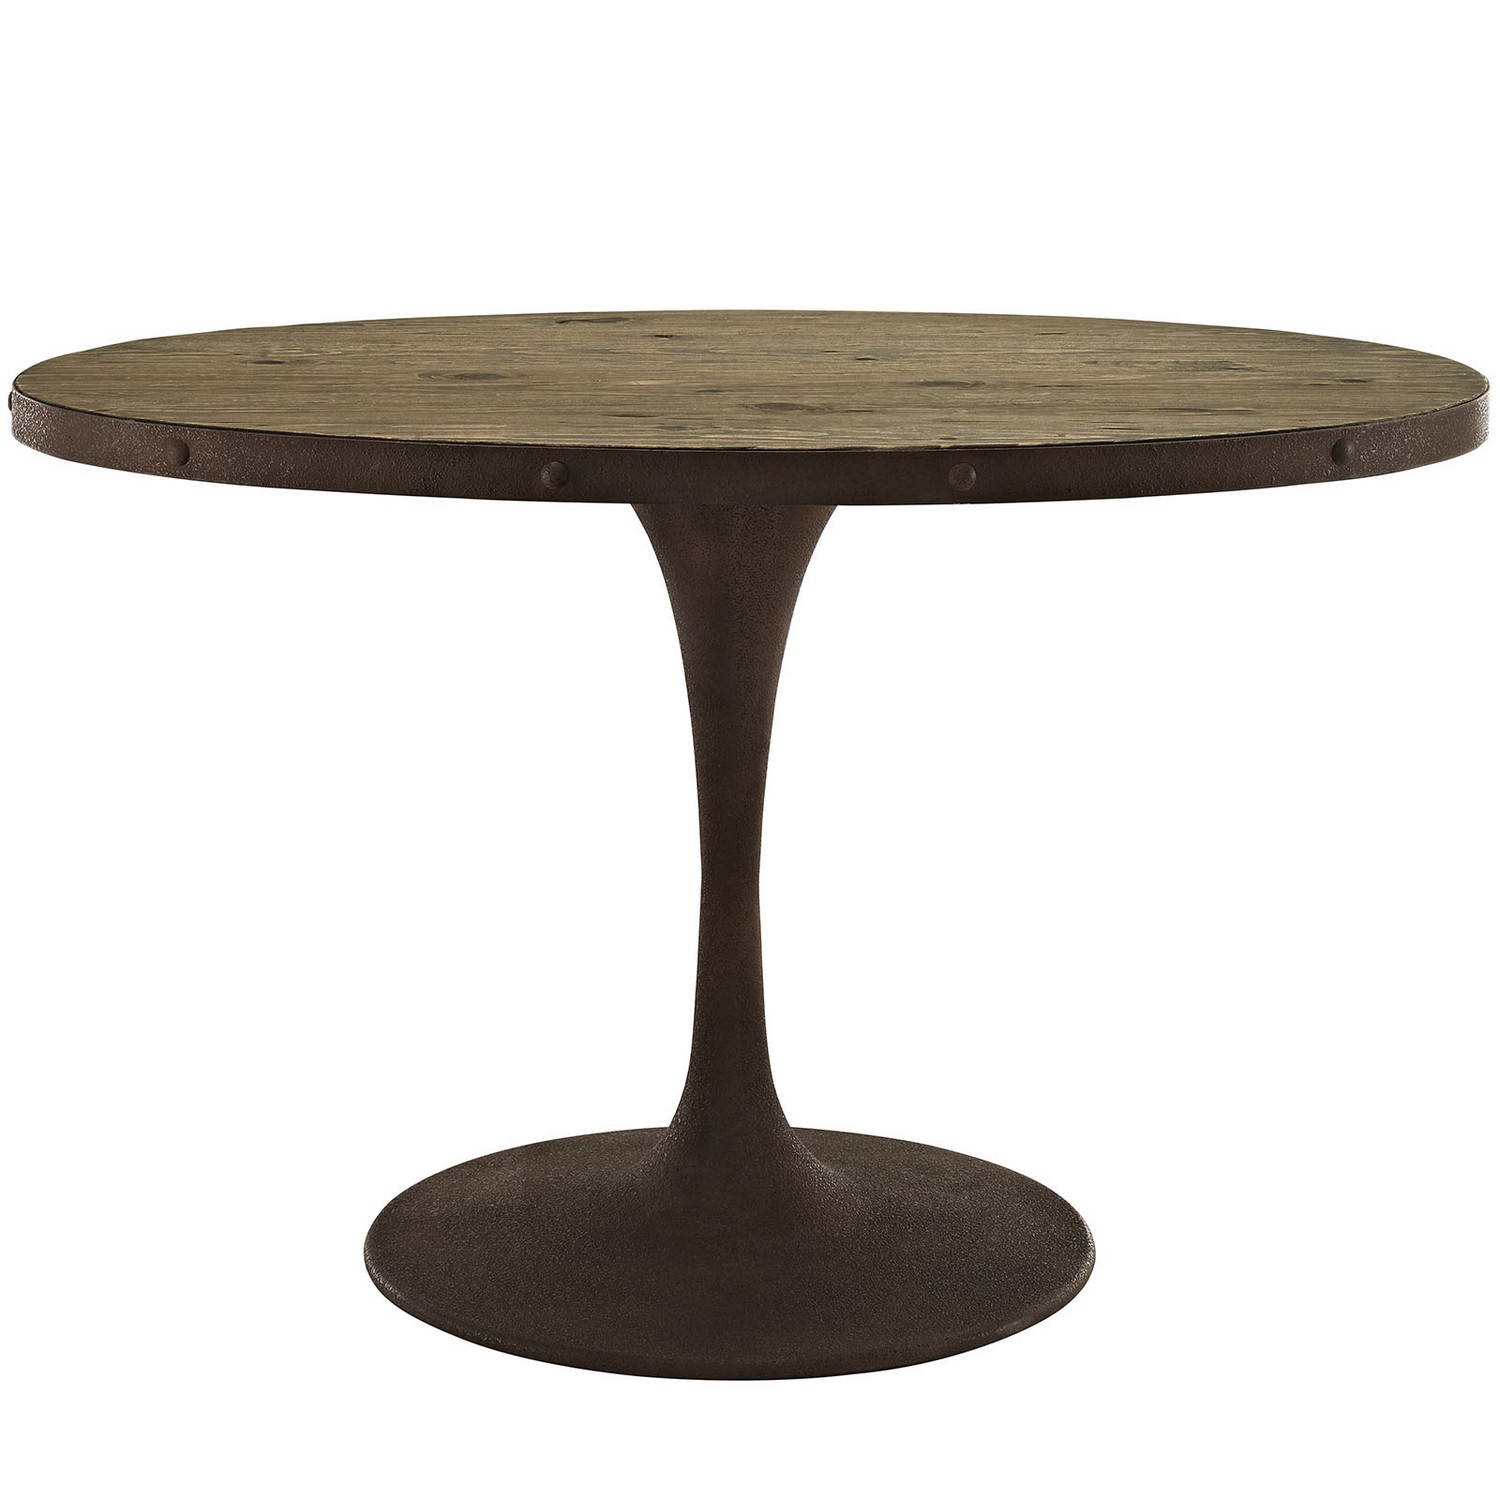 Modway Drive 47-inch Oval Wood Top Dining Table - Brown